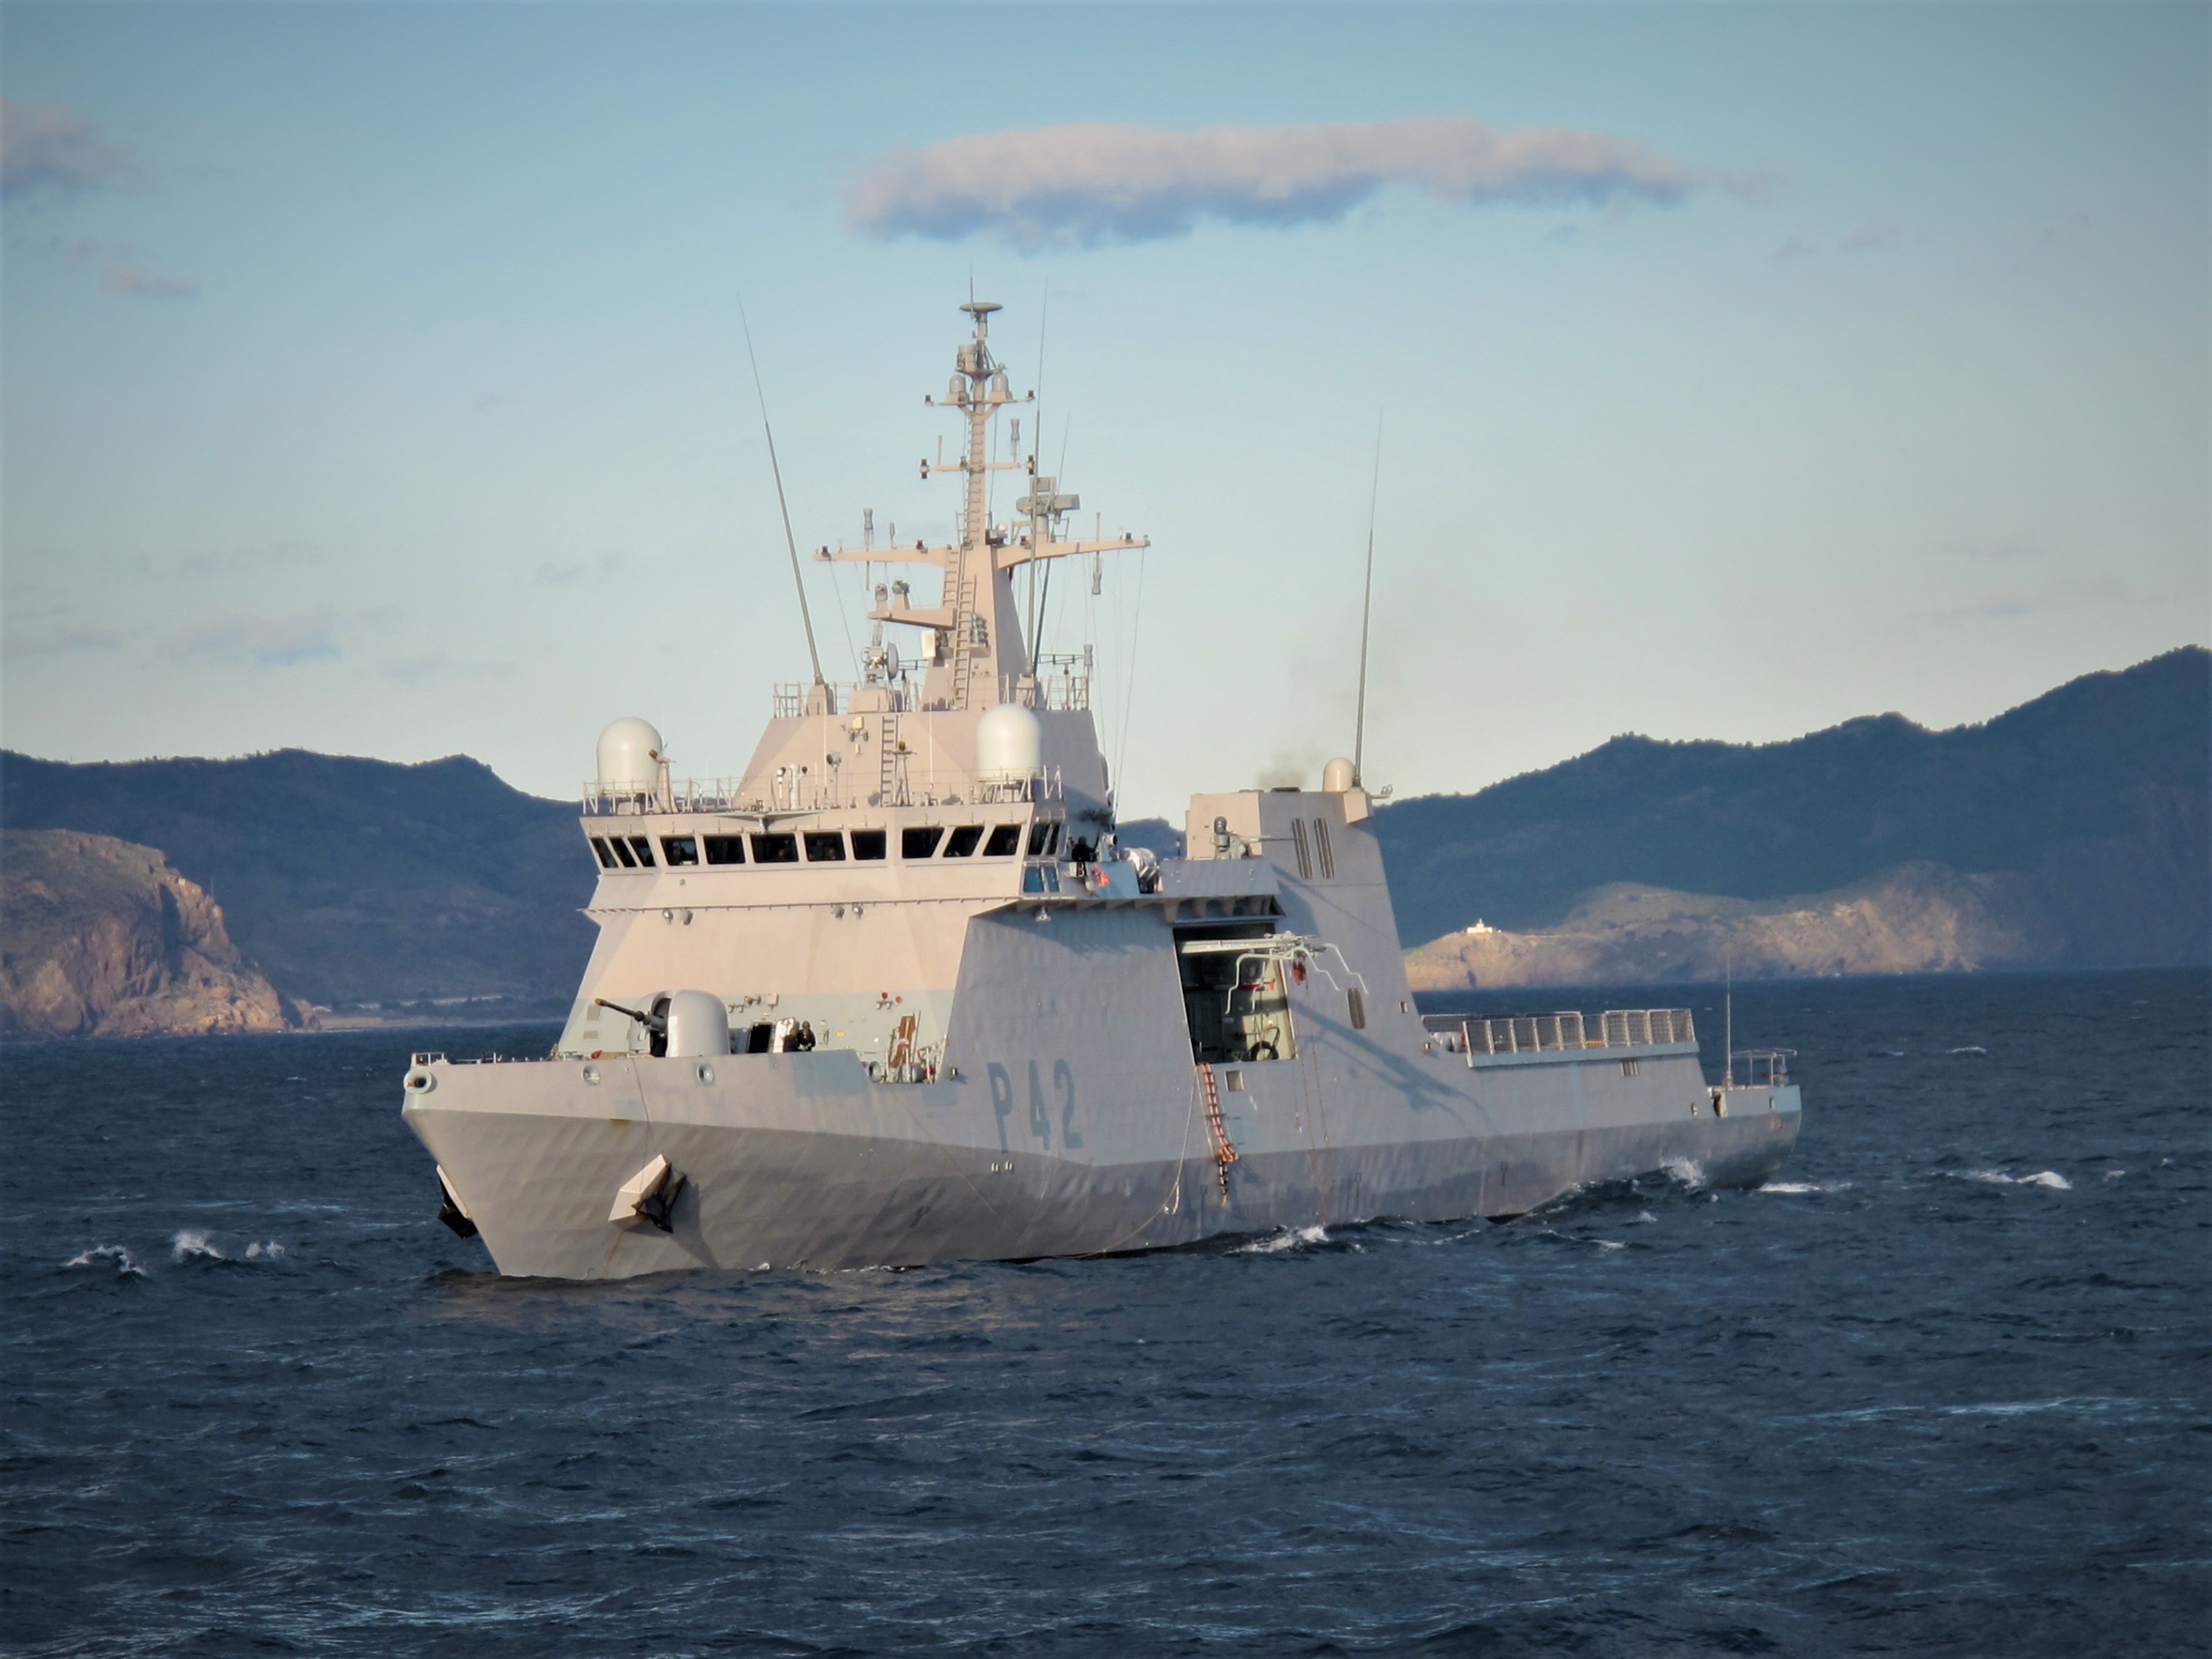 The OPV 'Rayo' in Canary Islands waters.